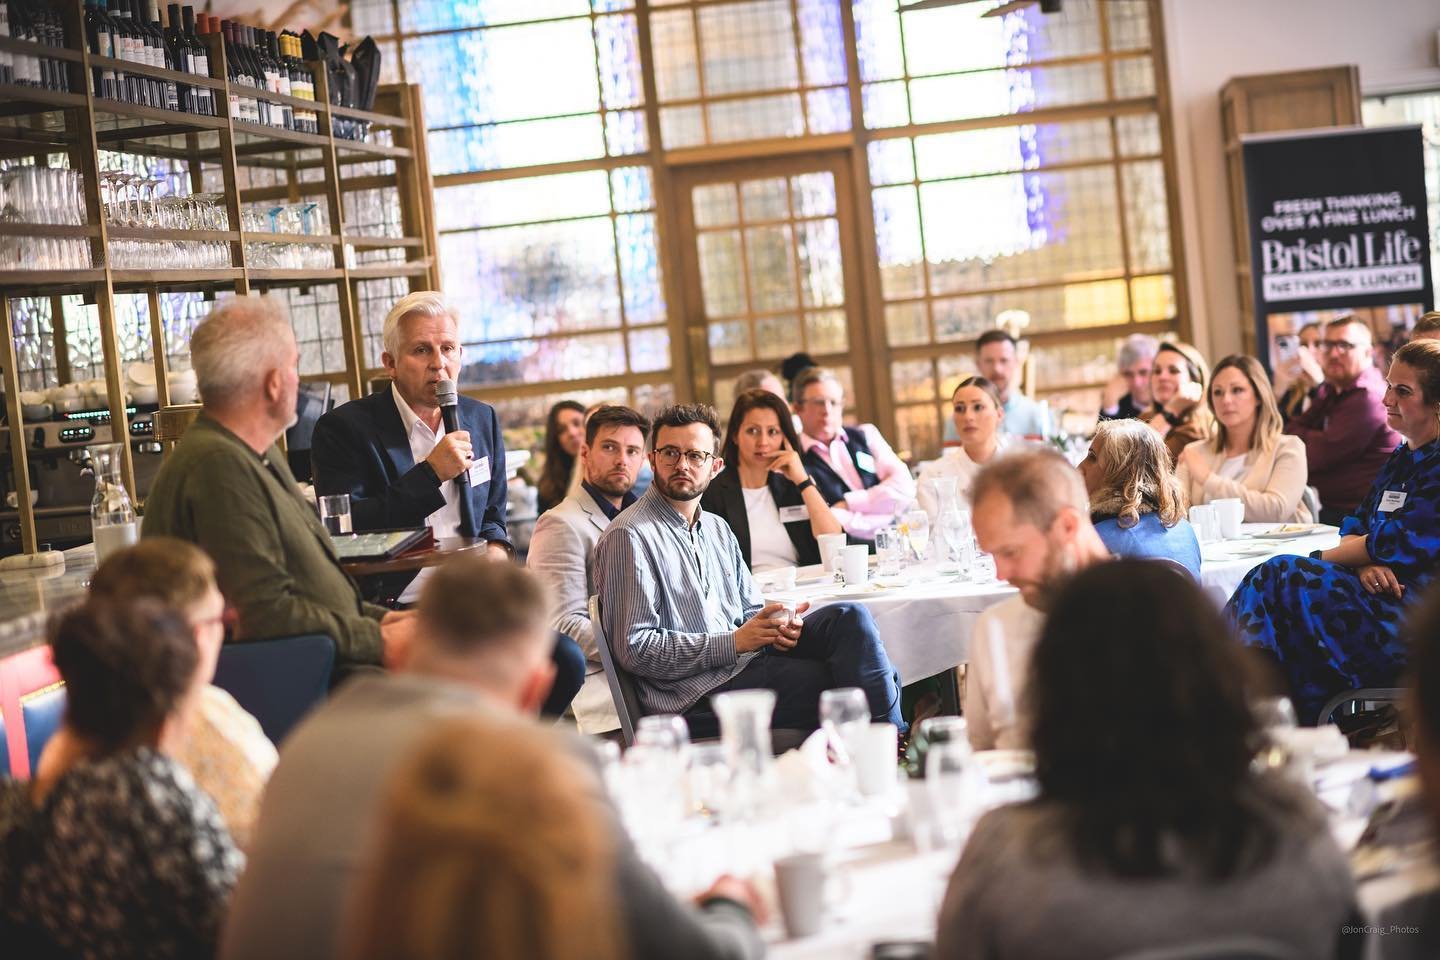 ✨Earlier this afternoon&nbsp;#BristolLife&nbsp;held a massive&nbsp;#NetworkLunch&nbsp;with  Bristol powerhouse and national treasure, Aardman Animations hearing from managing director Sean Clarke!

Our thanks to all that attended and to everyone that